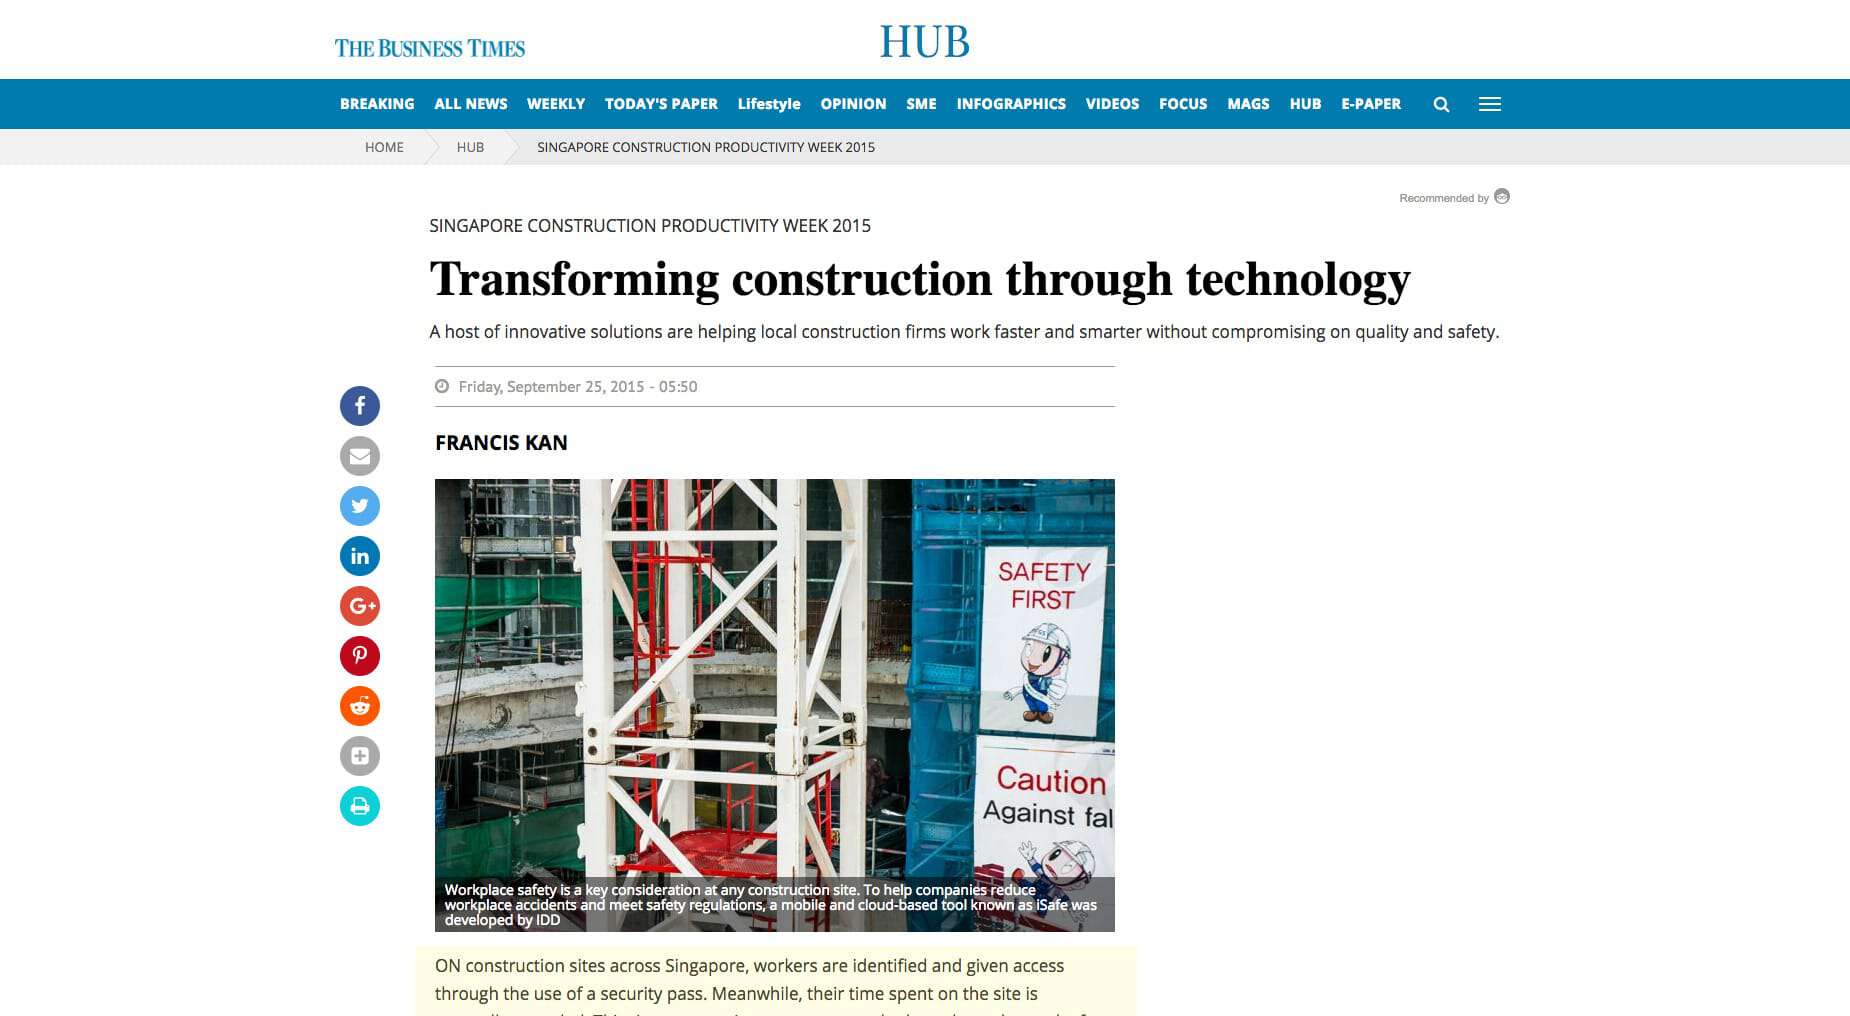 BT Article HUB Section: Transforming Construction Through Technology